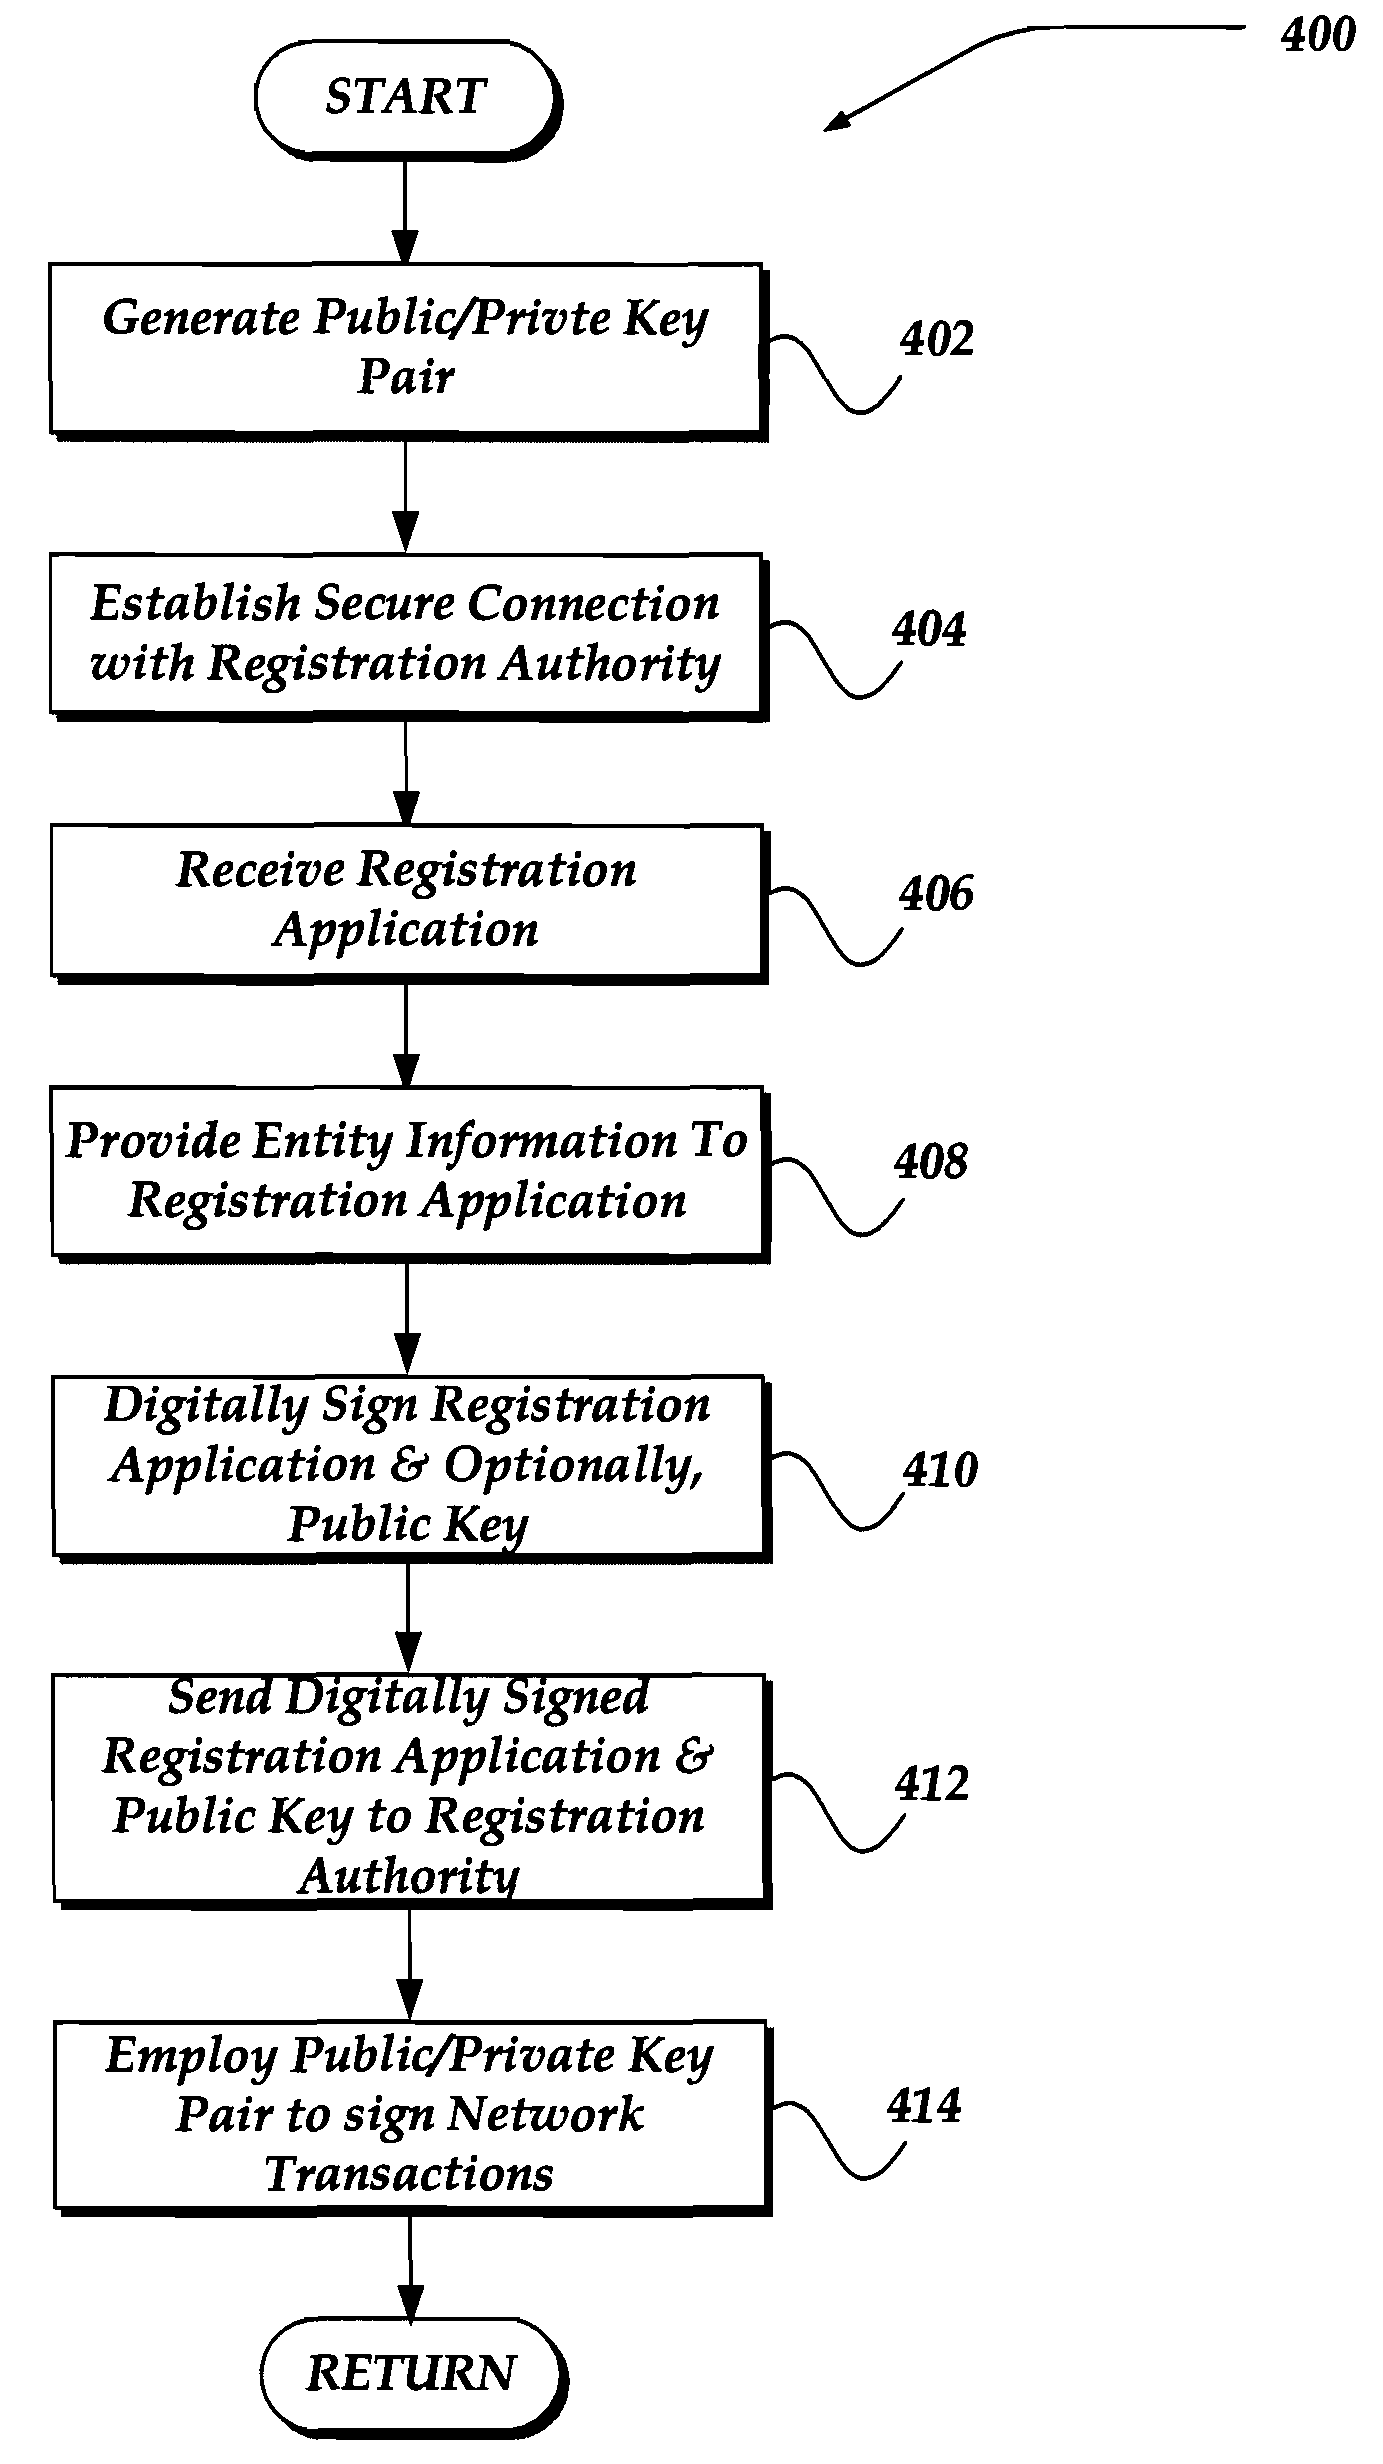 Pre-binding and tight binding of an on-line identity to a digital signature